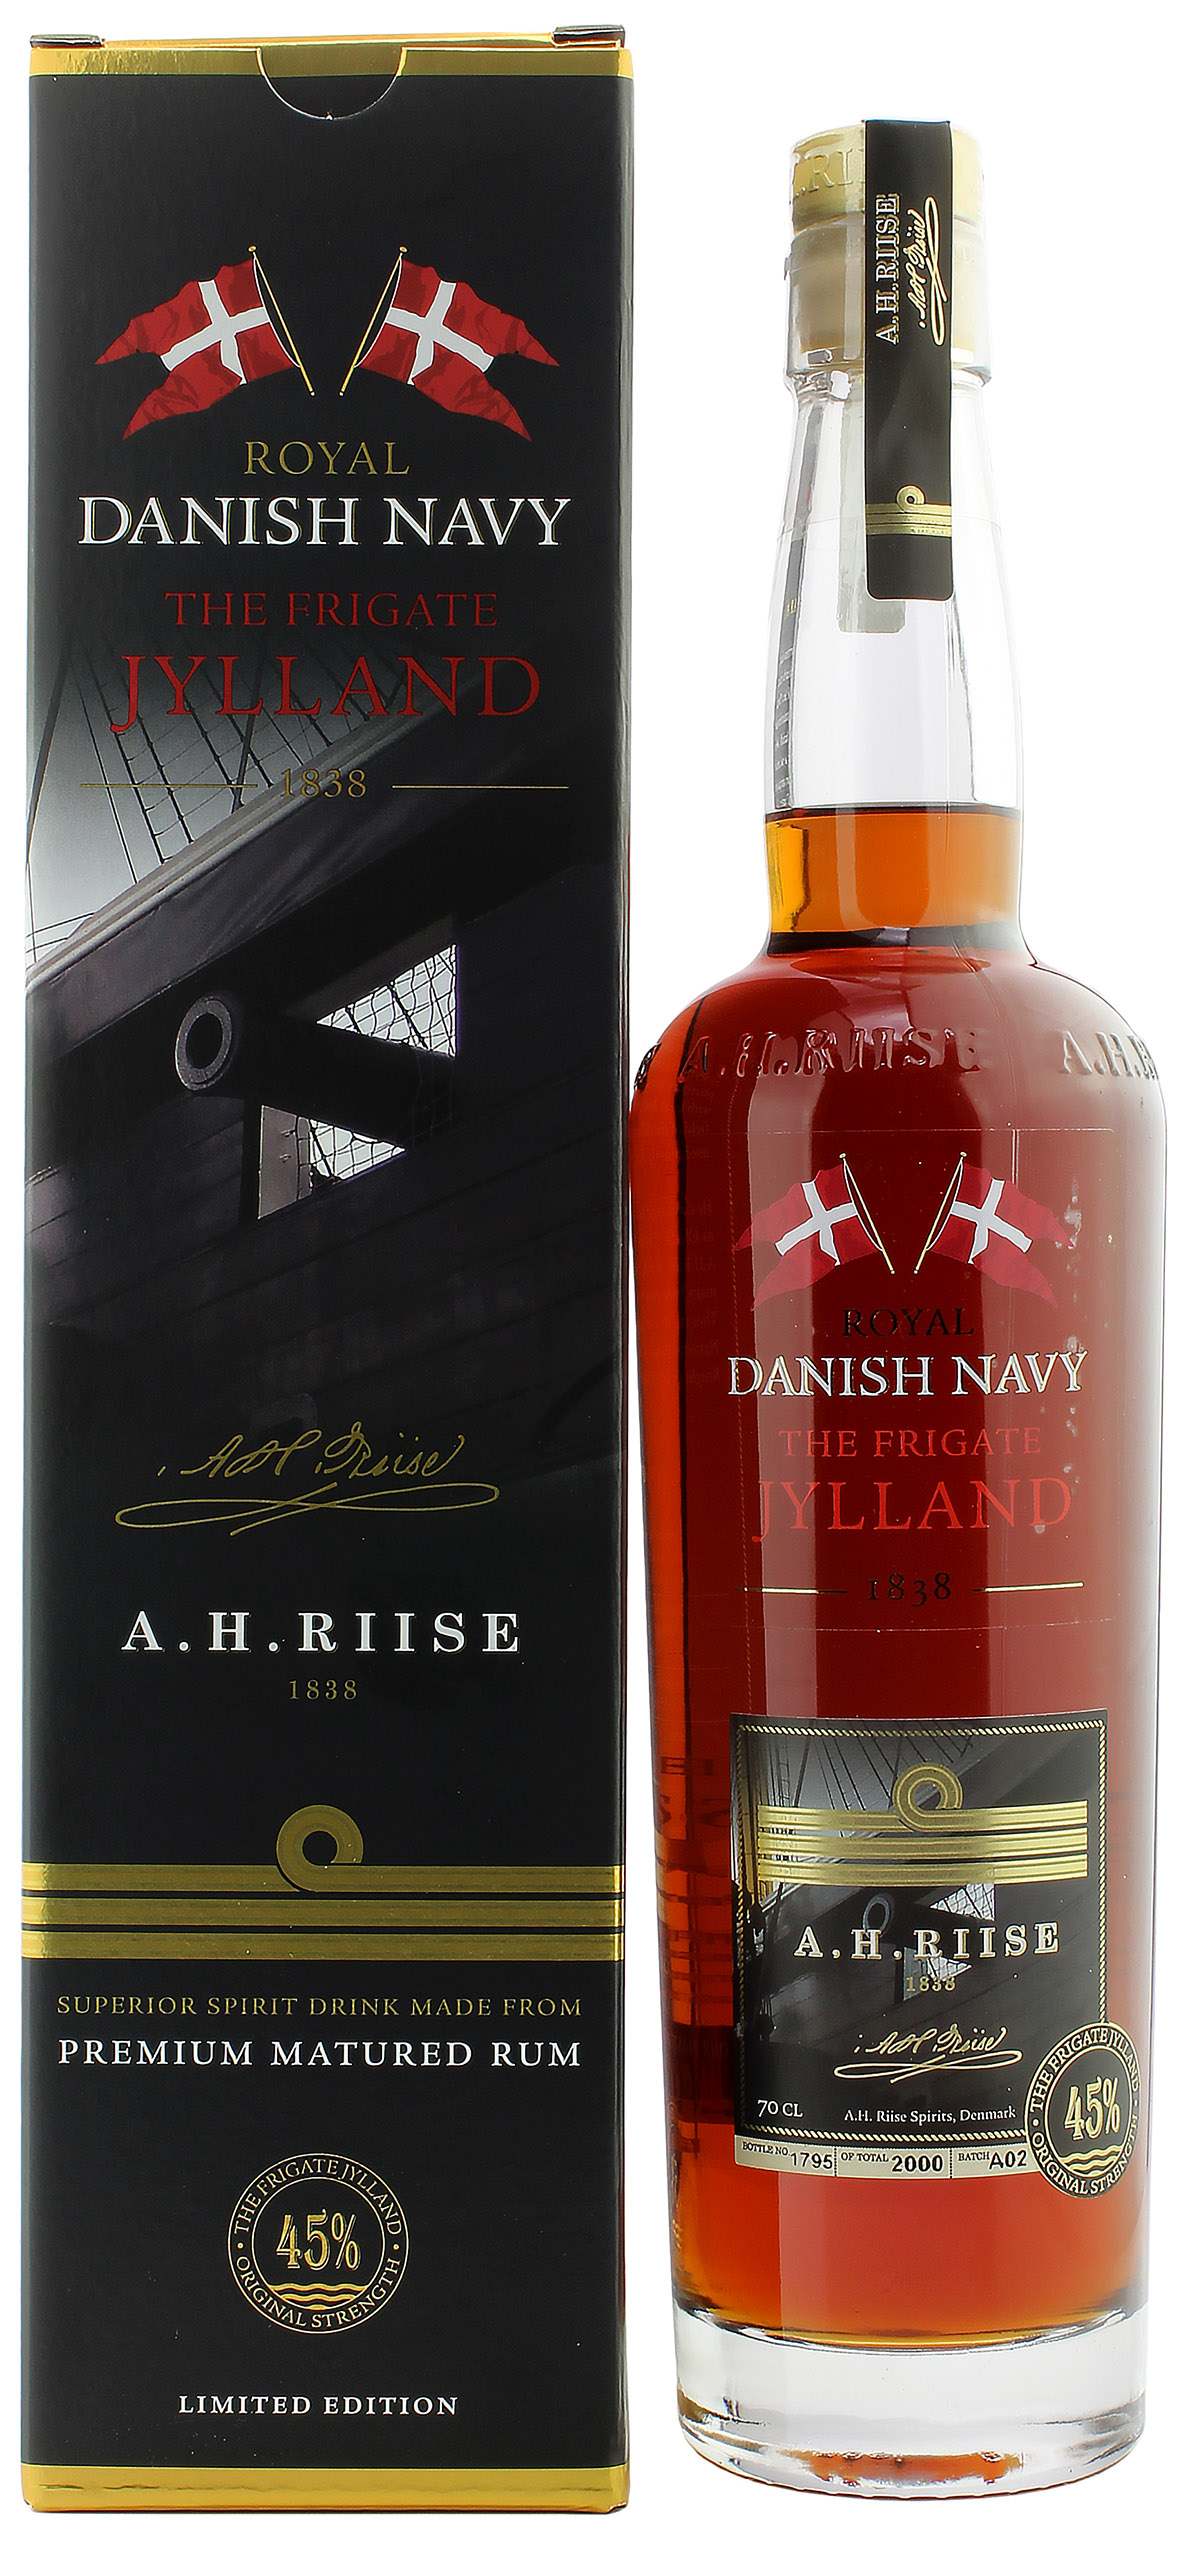 A.H. Riise Royal Danish Navy The Frigate Jylland 45.0% 0,7l